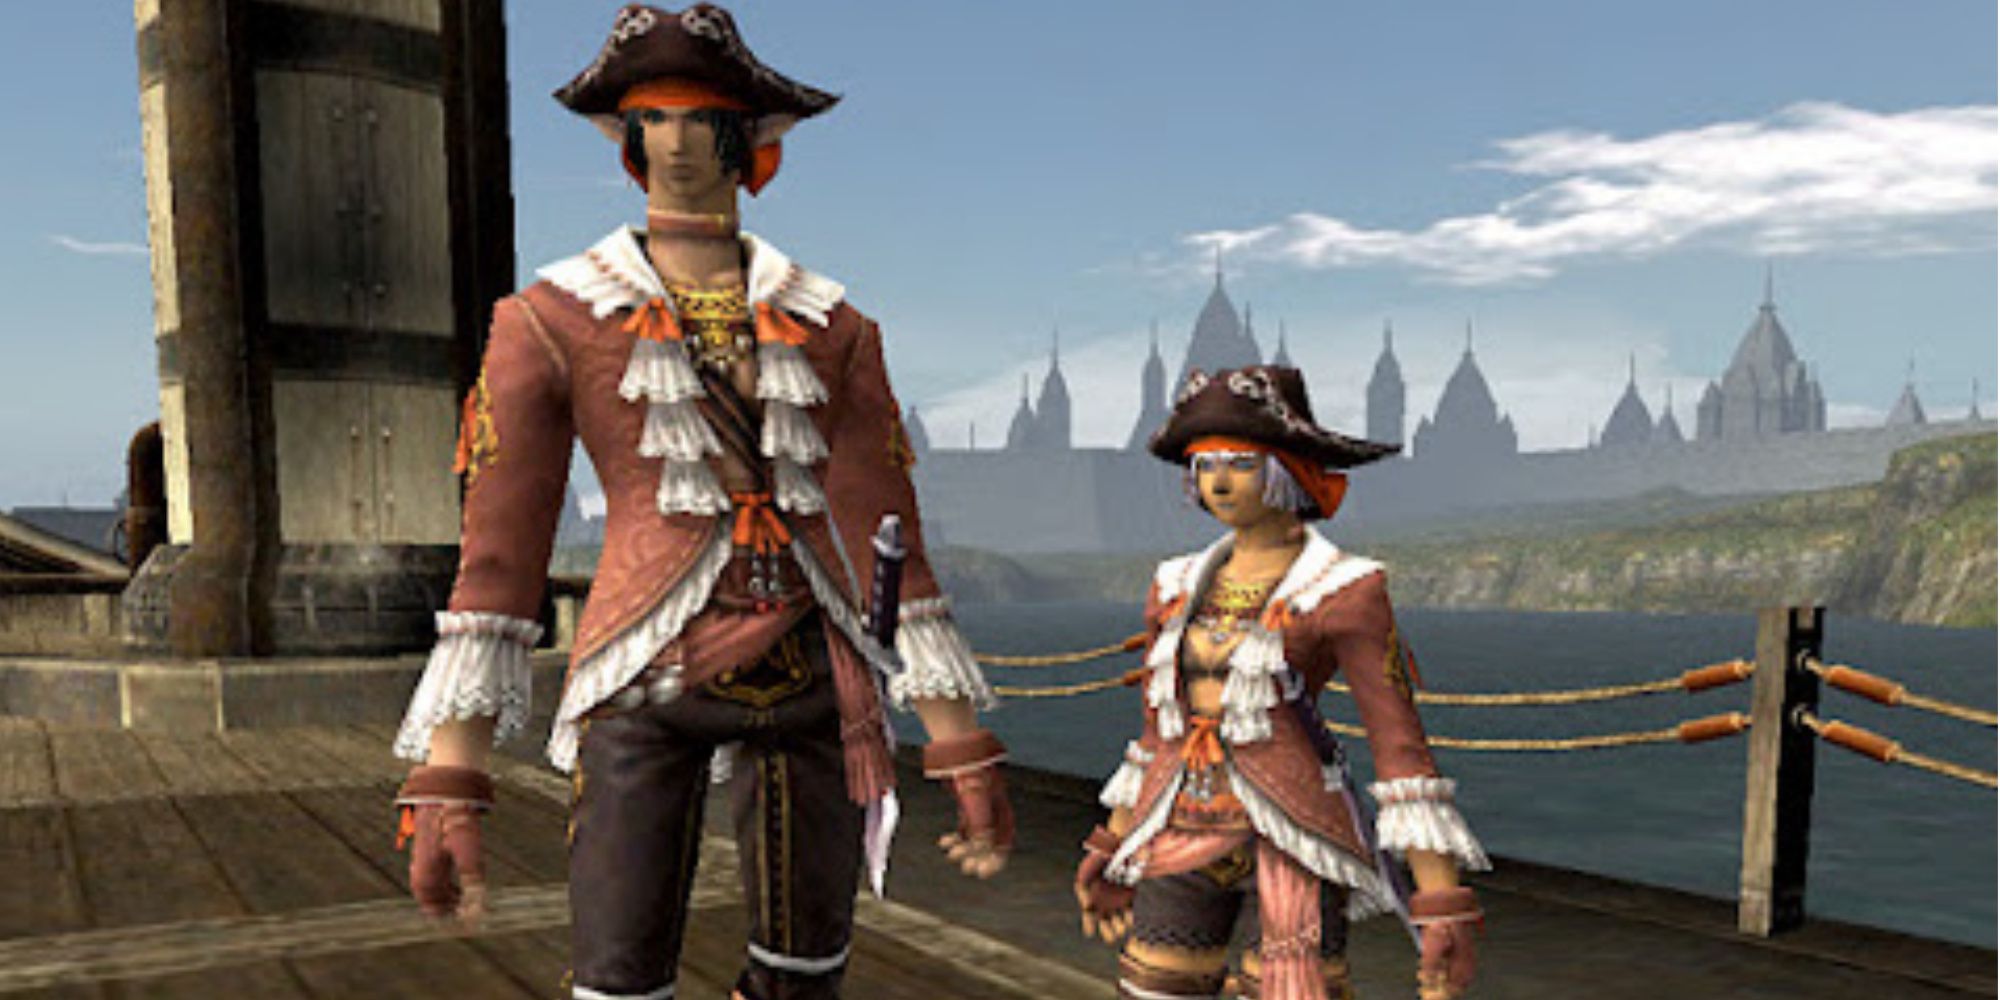 Two Corsair characters in Final Fantasy 11